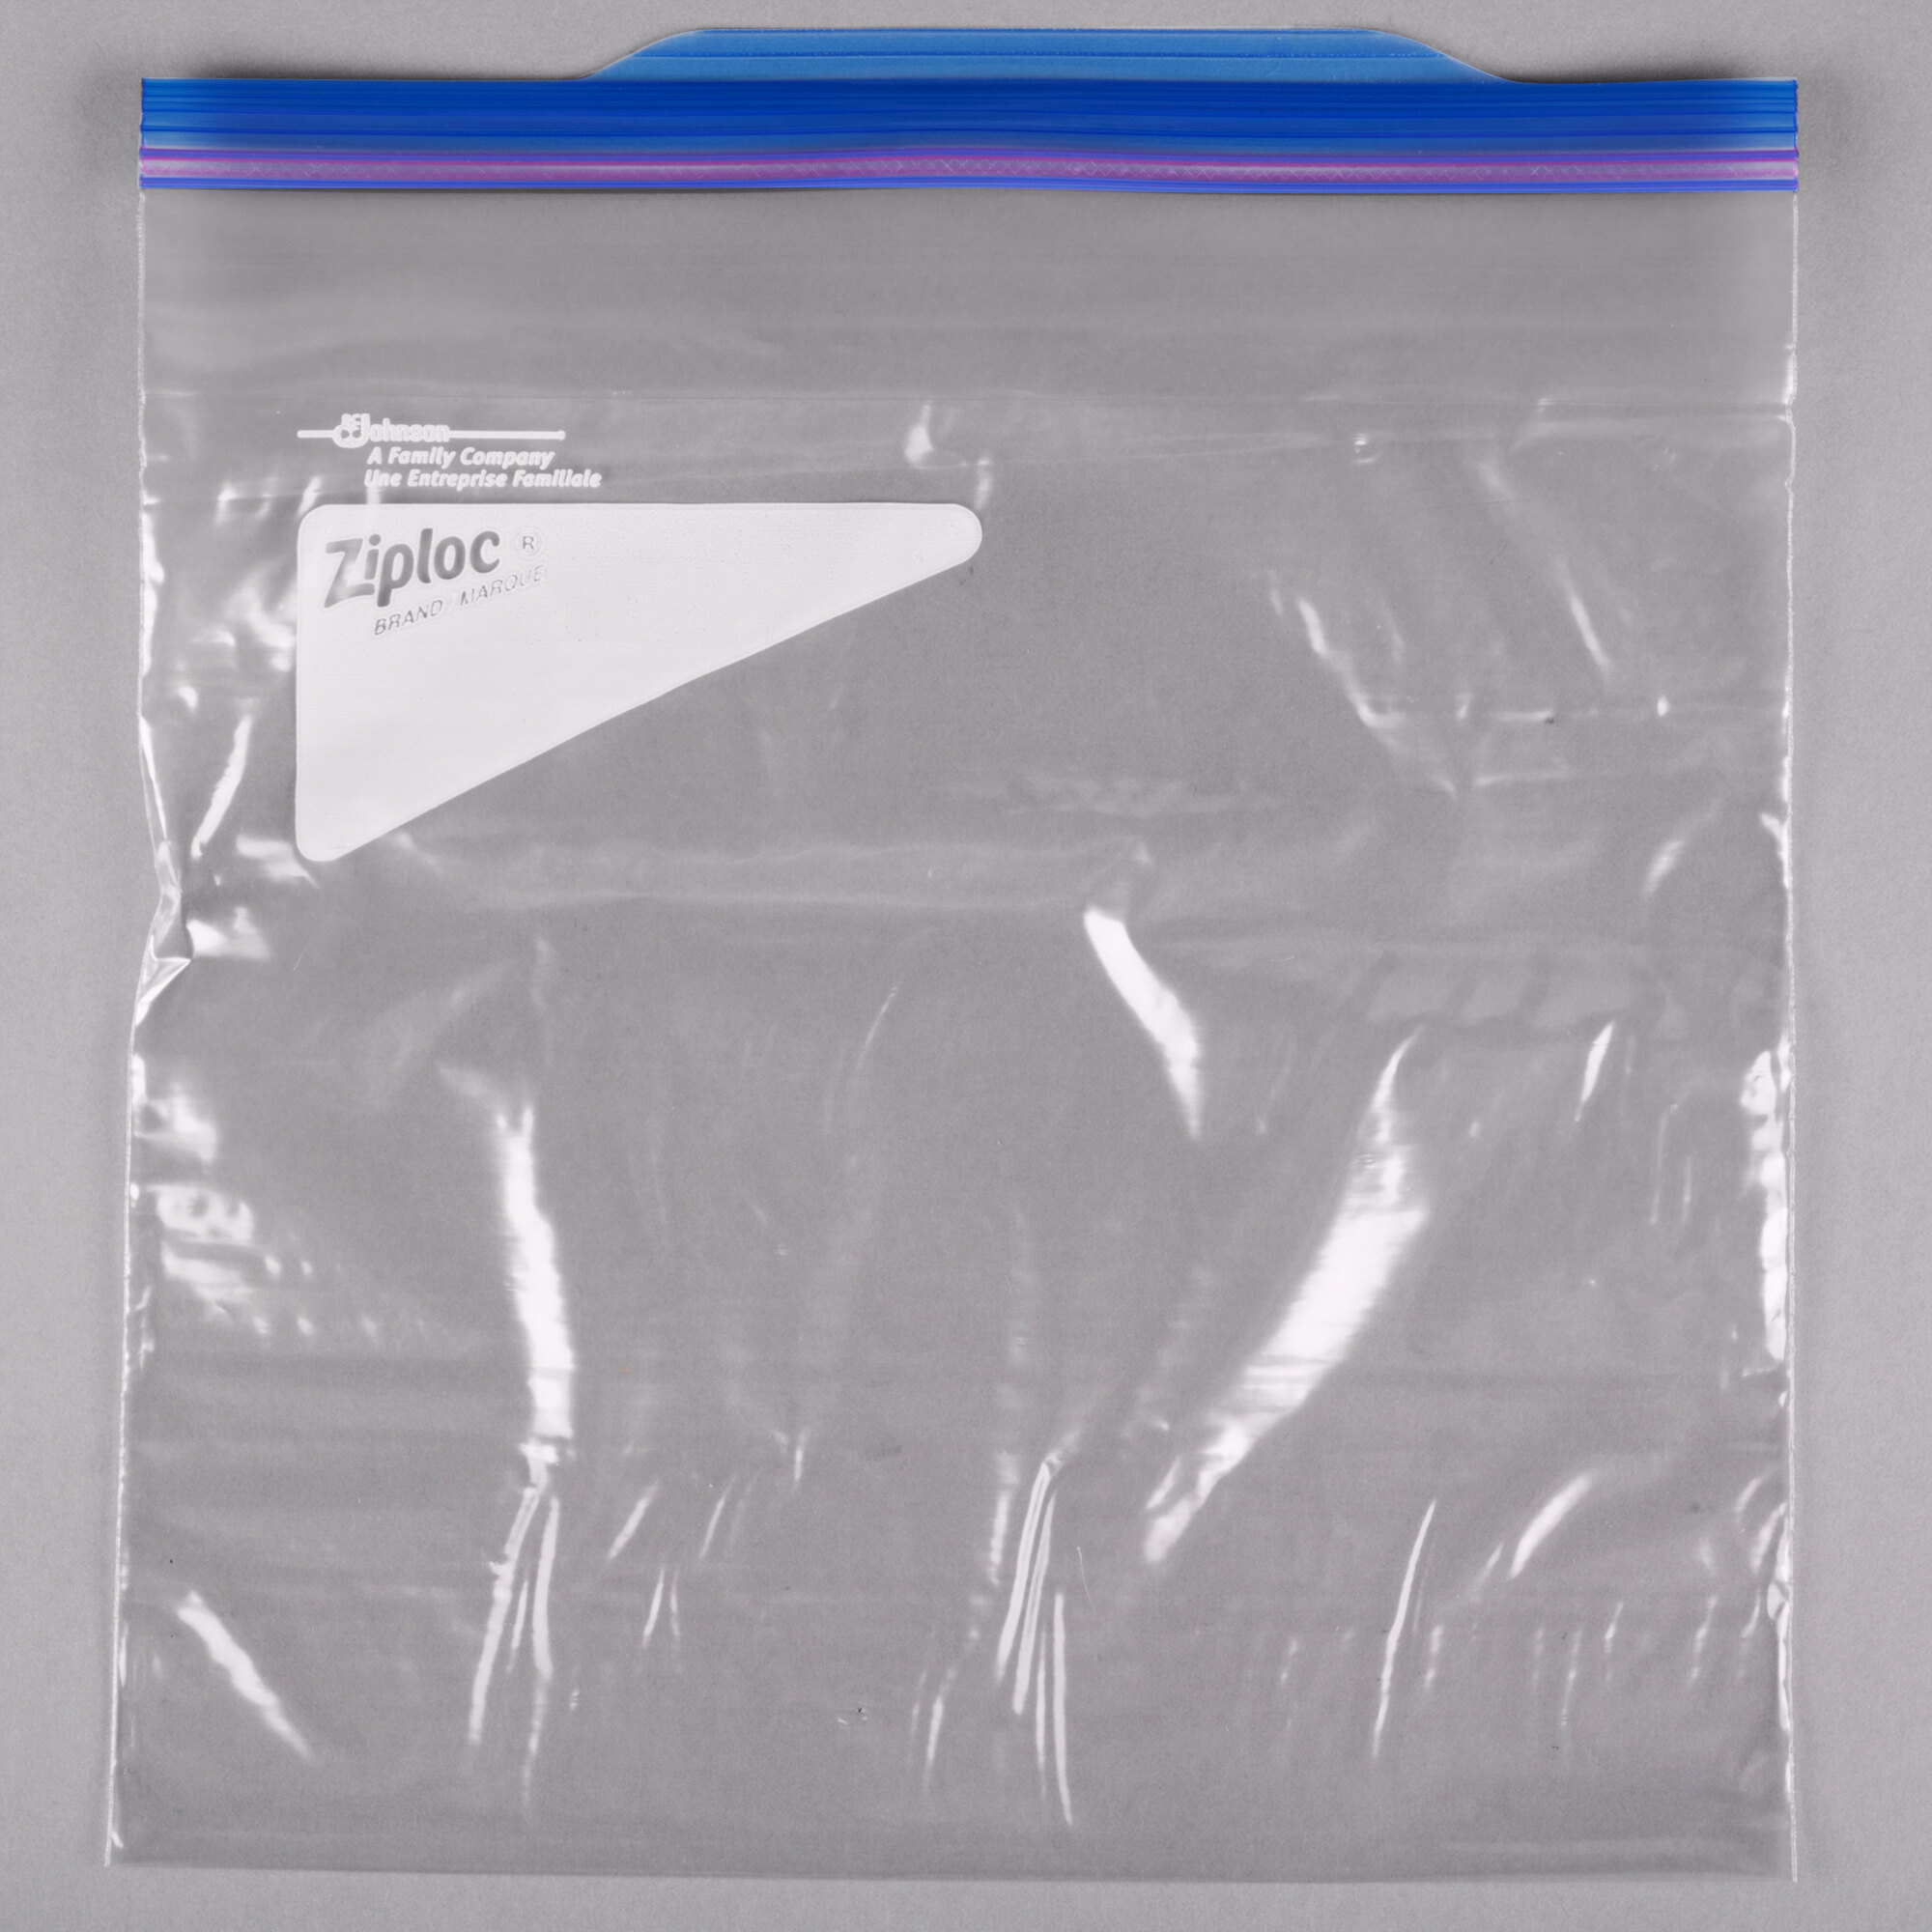 Ziploc® 682258 10 916 X 10 34 One Gallon Freezer Bag With Double Zipper And Write On Label 6216